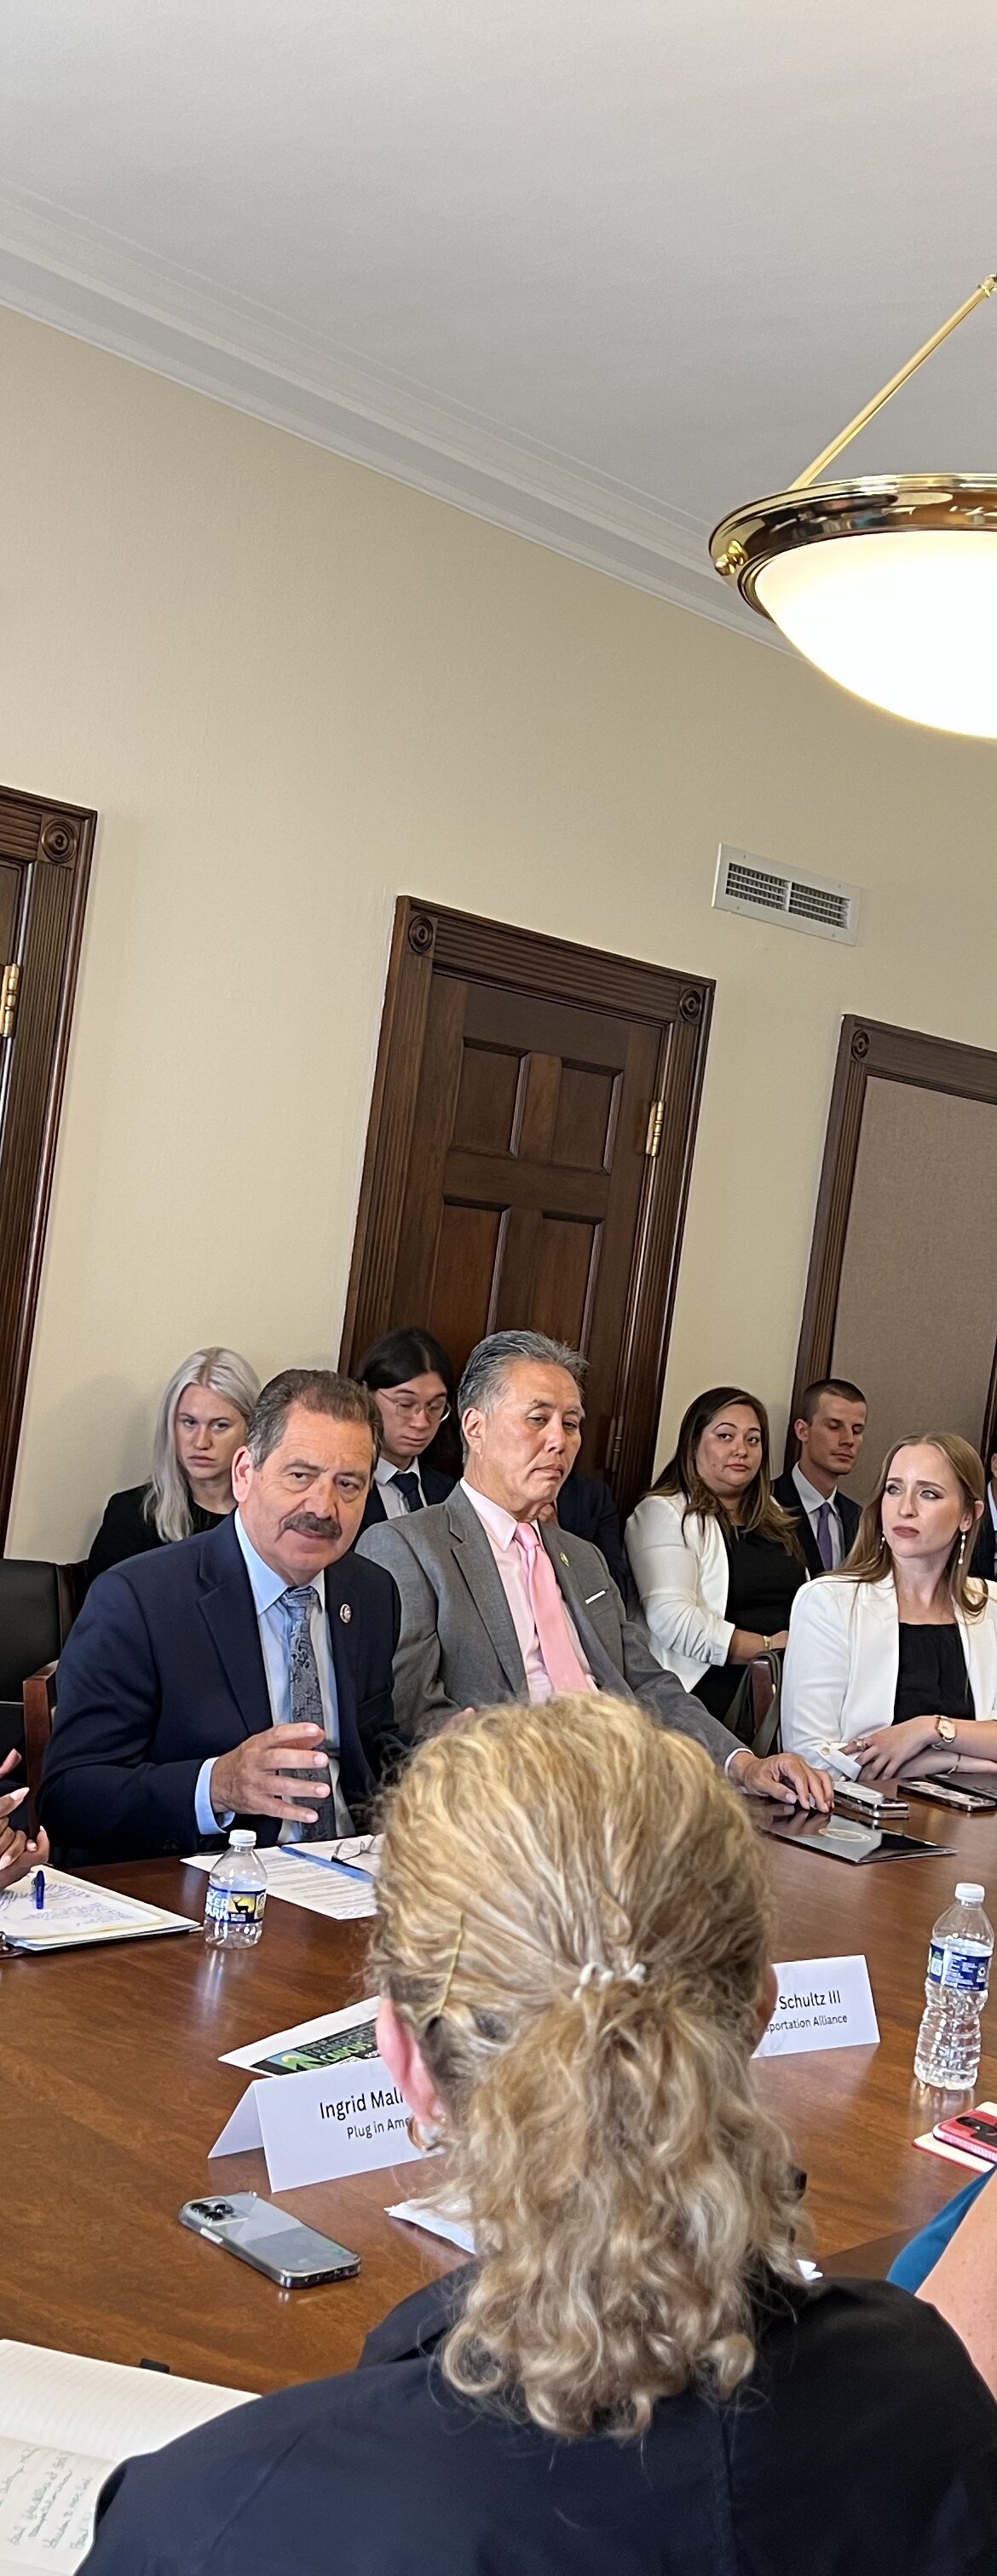 Representative Chuy Garcia sits in the center of an oval table, surrounded by advocates and legislatures